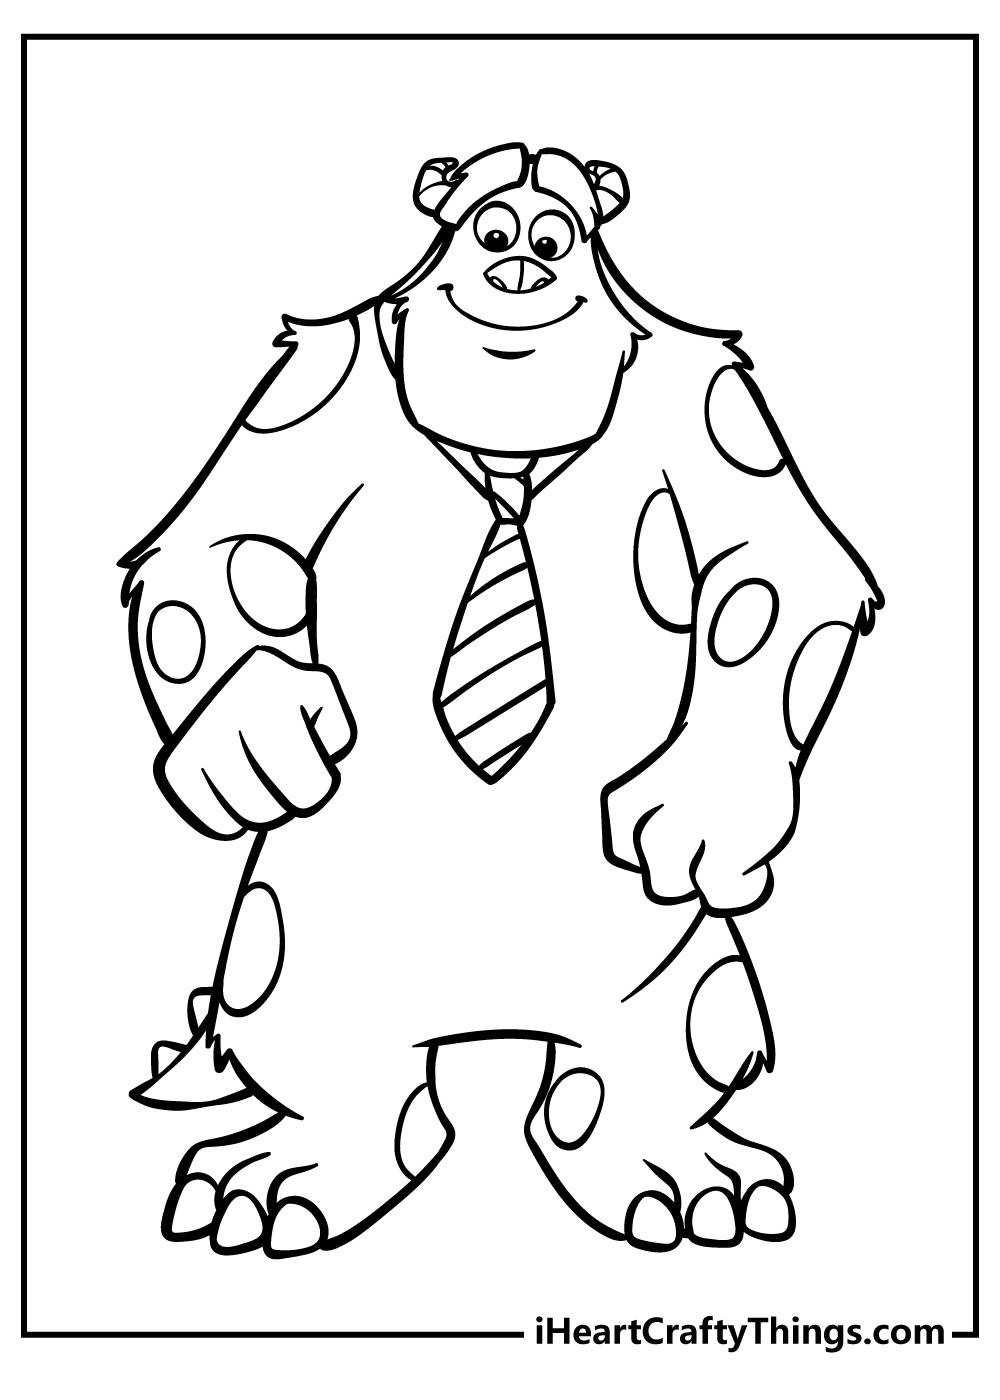 🎖️7 Printable Monsters Inc. Coloring Pages (Updated 2022) mới nhất 06/